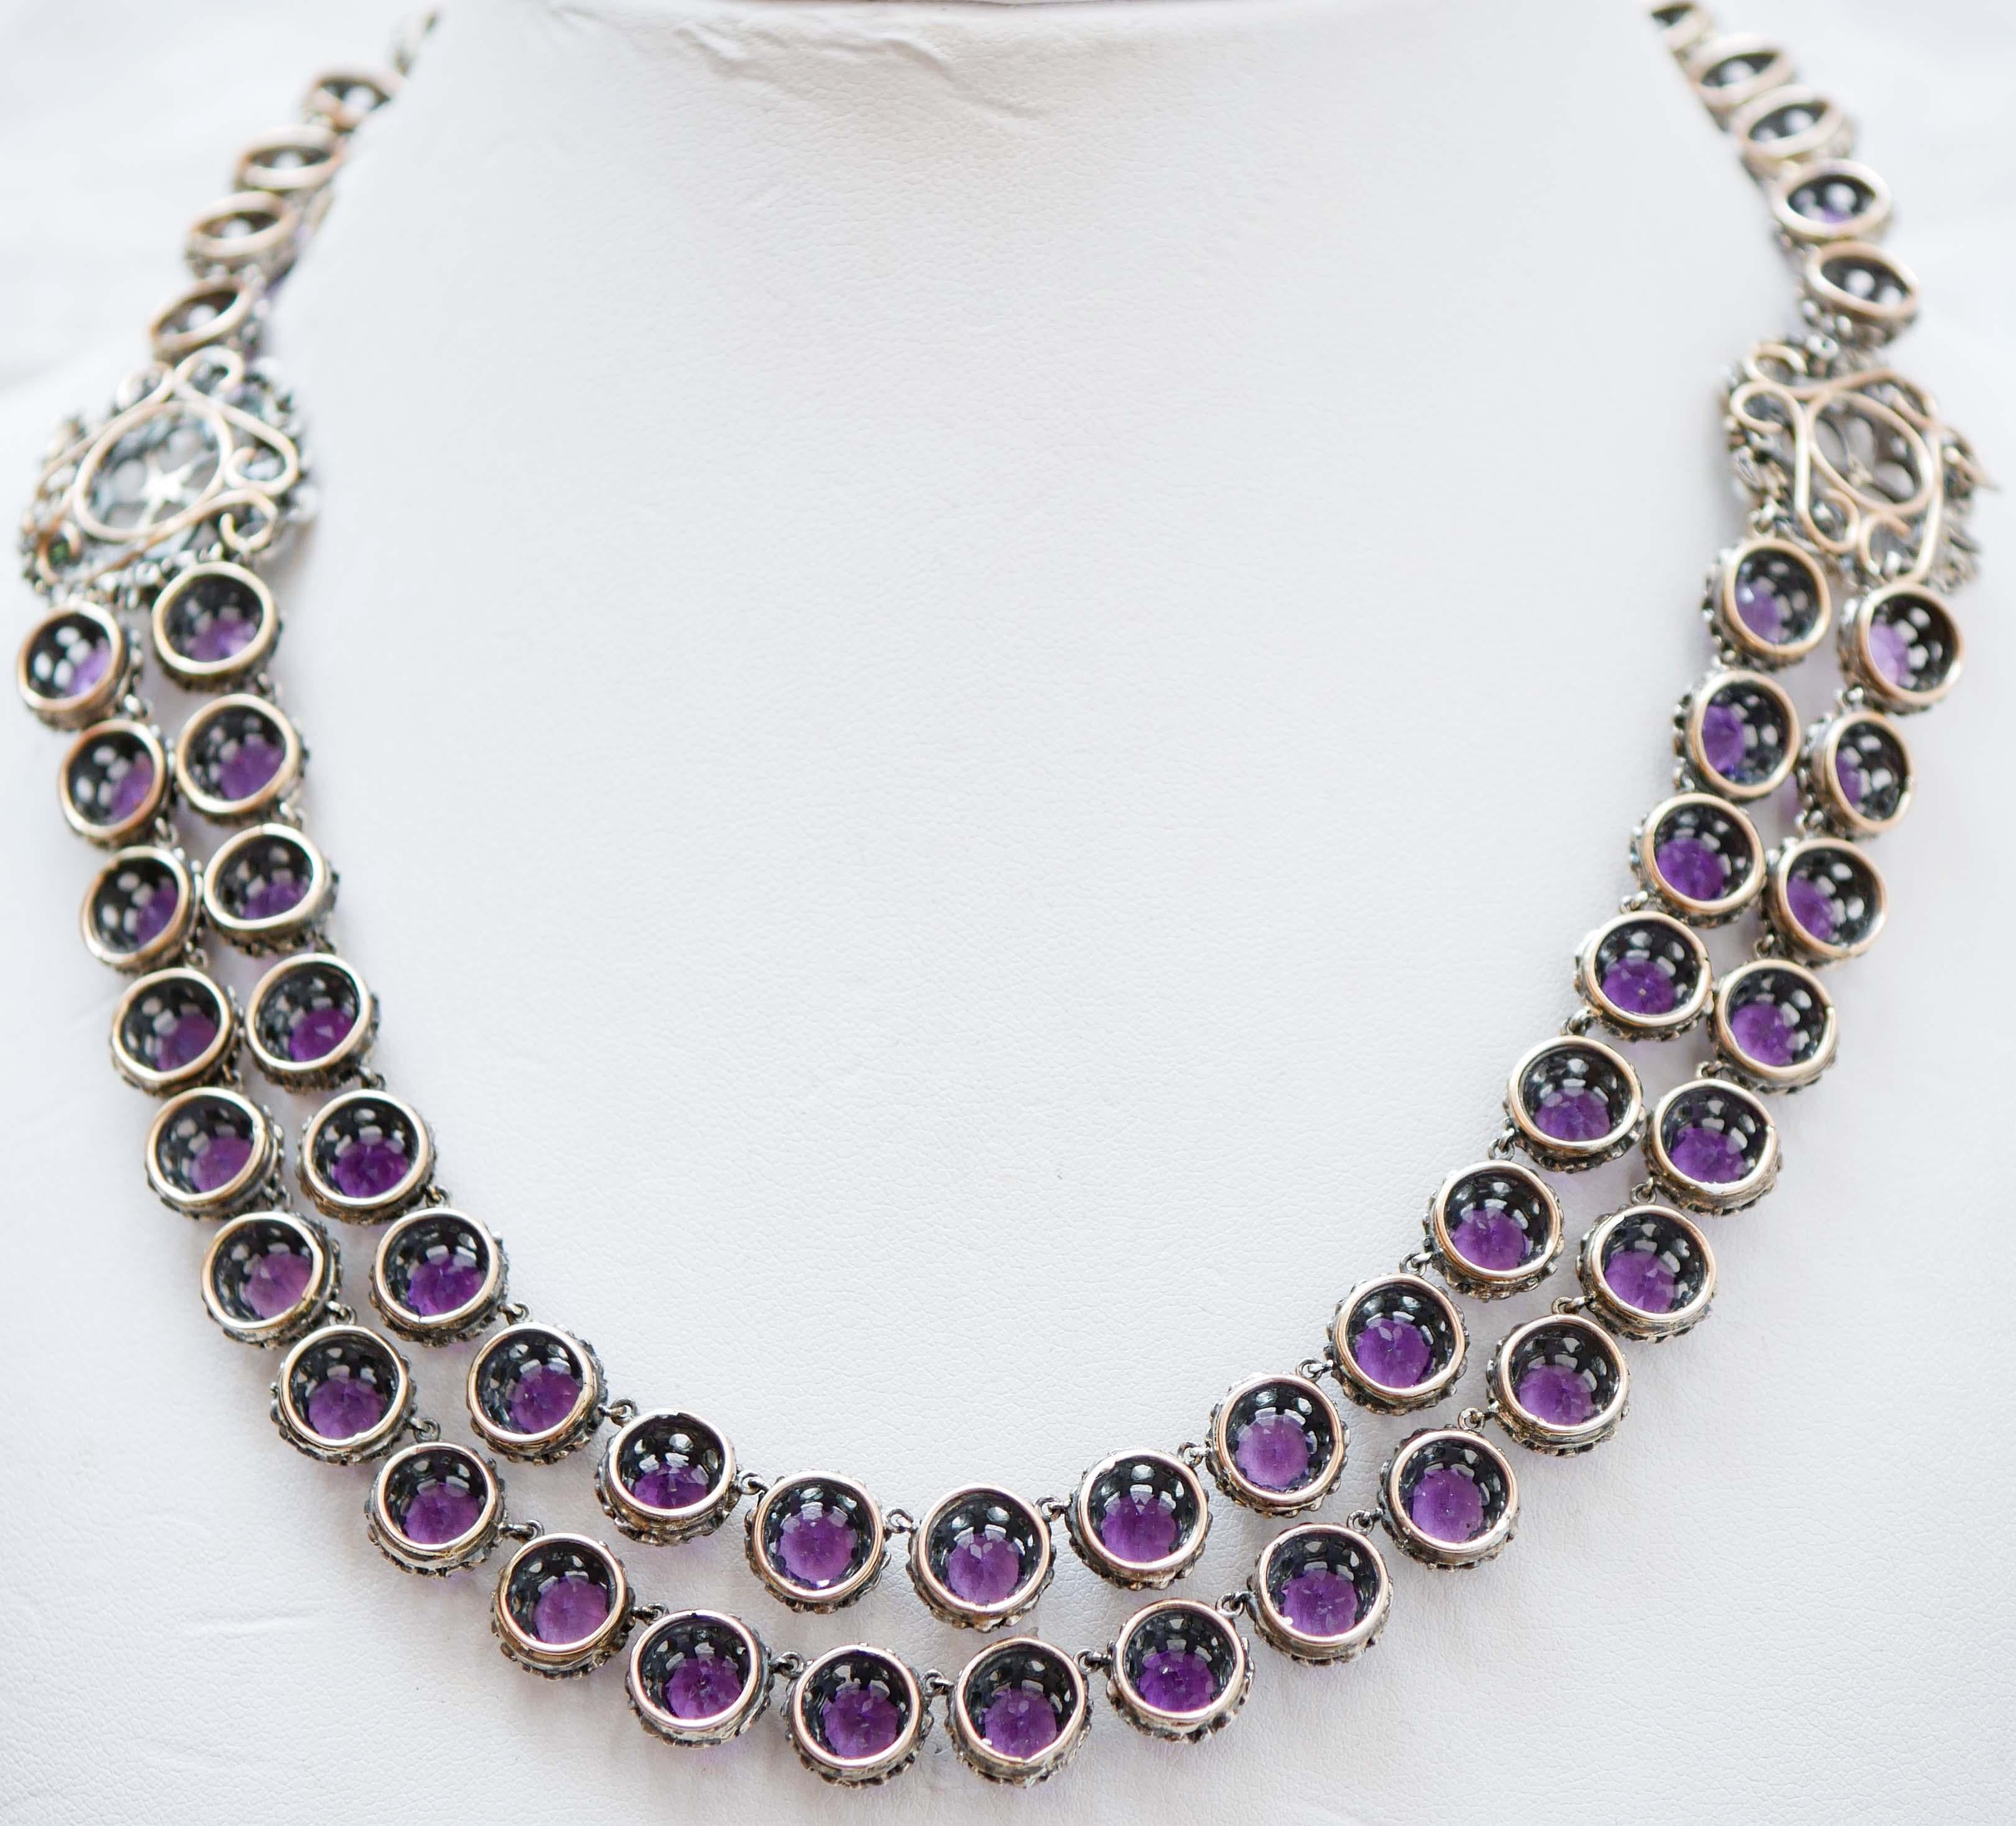 Mixed Cut Amethysts, Tsavorite, Rock Crystal, Diamonds, Pearls, Gold and Silver Necklace. For Sale